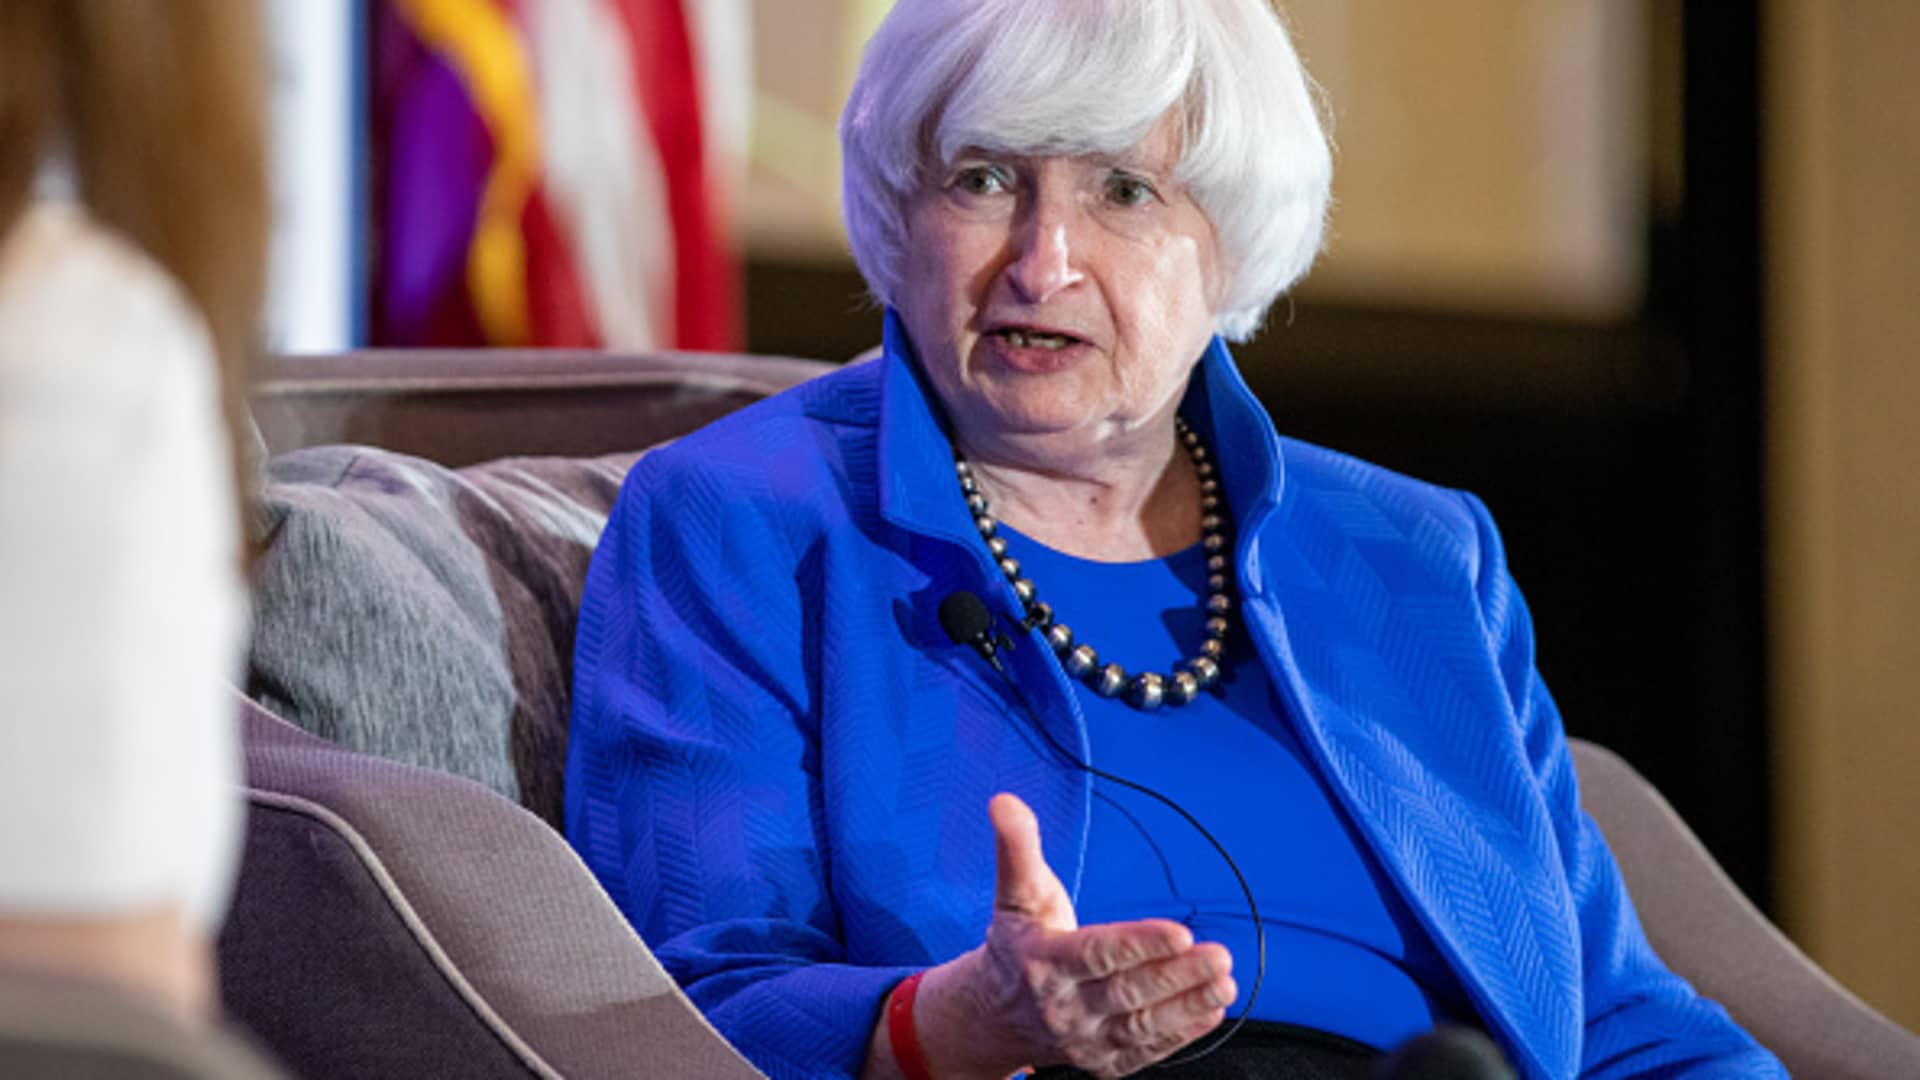 Janet Yellen, U.S. Treasury secretary, speaks during an interview at the National Association of Business Economics (NABE) annual meeting in Arlington, Virginia, U.S., on Tuesday, Sept. 28, 2021.